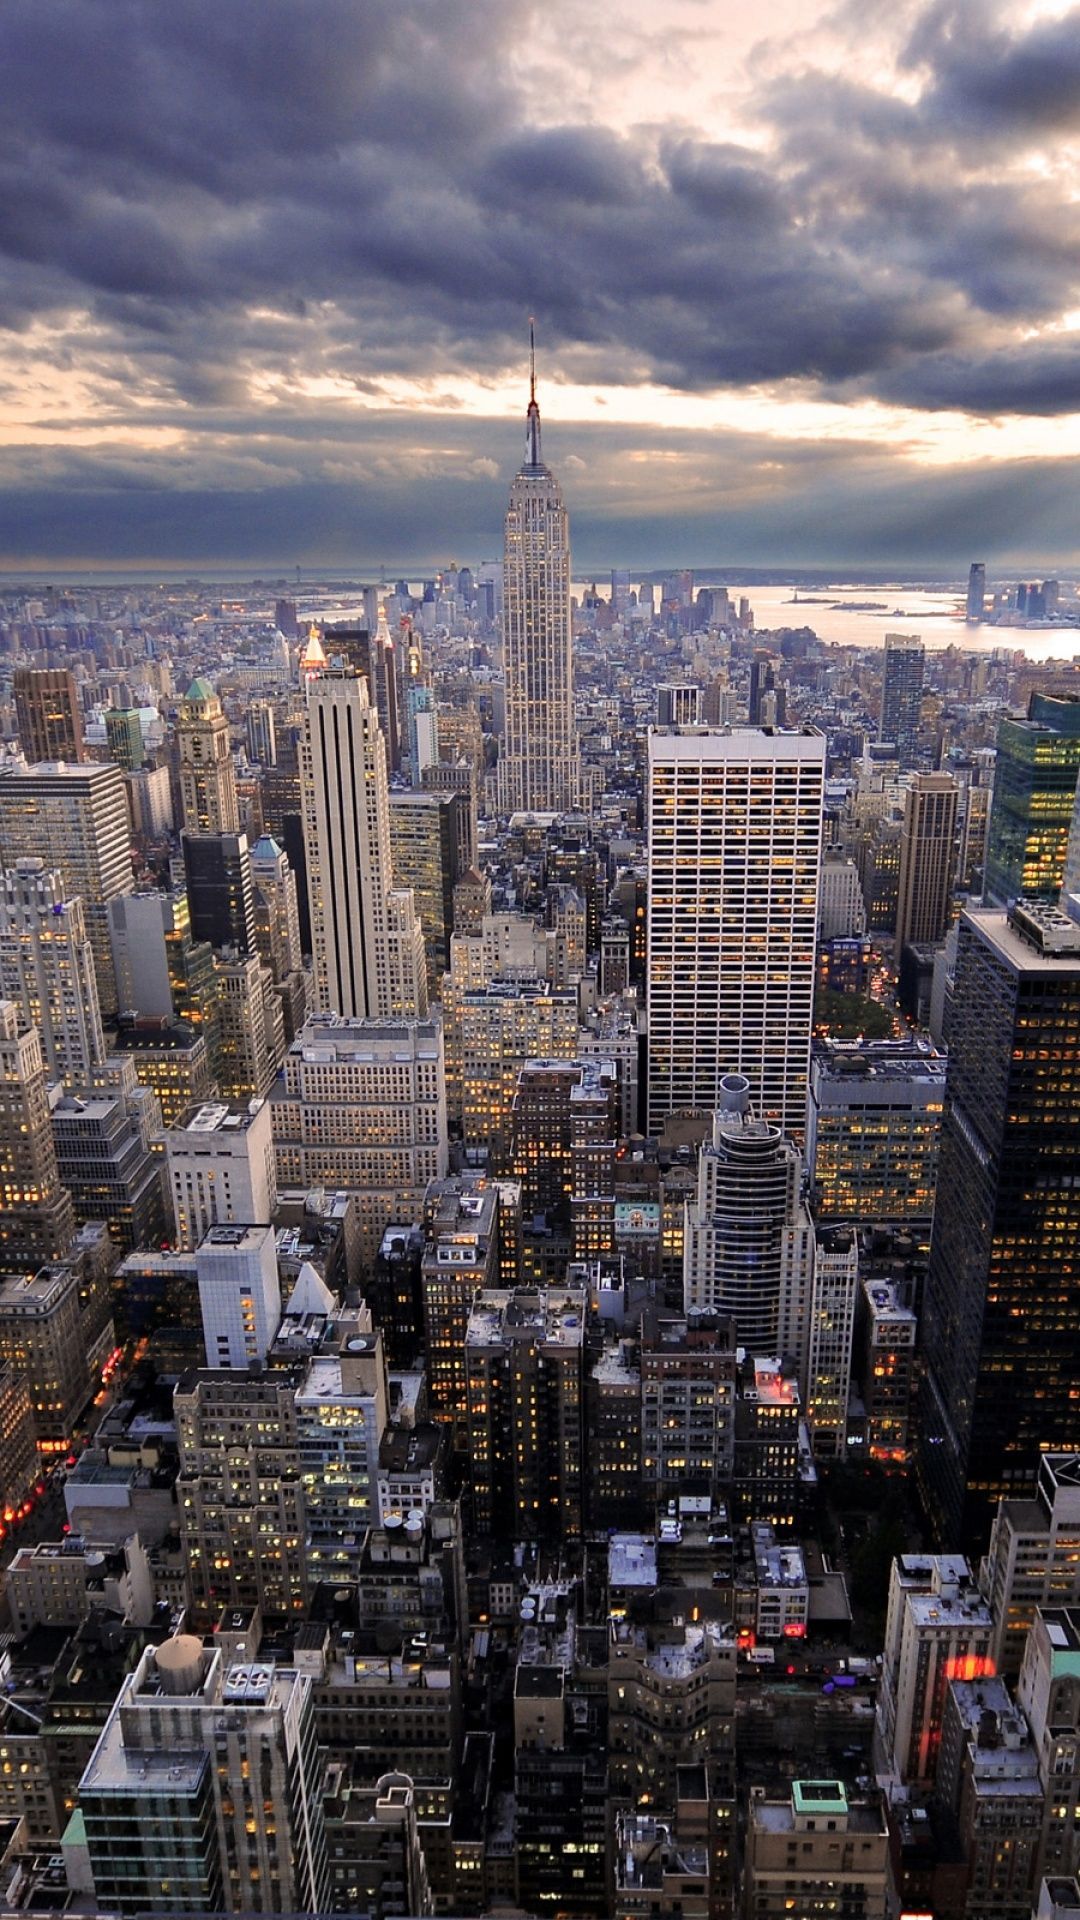 IPhone 6 Wallpapers New York City - iPhone6wp.com